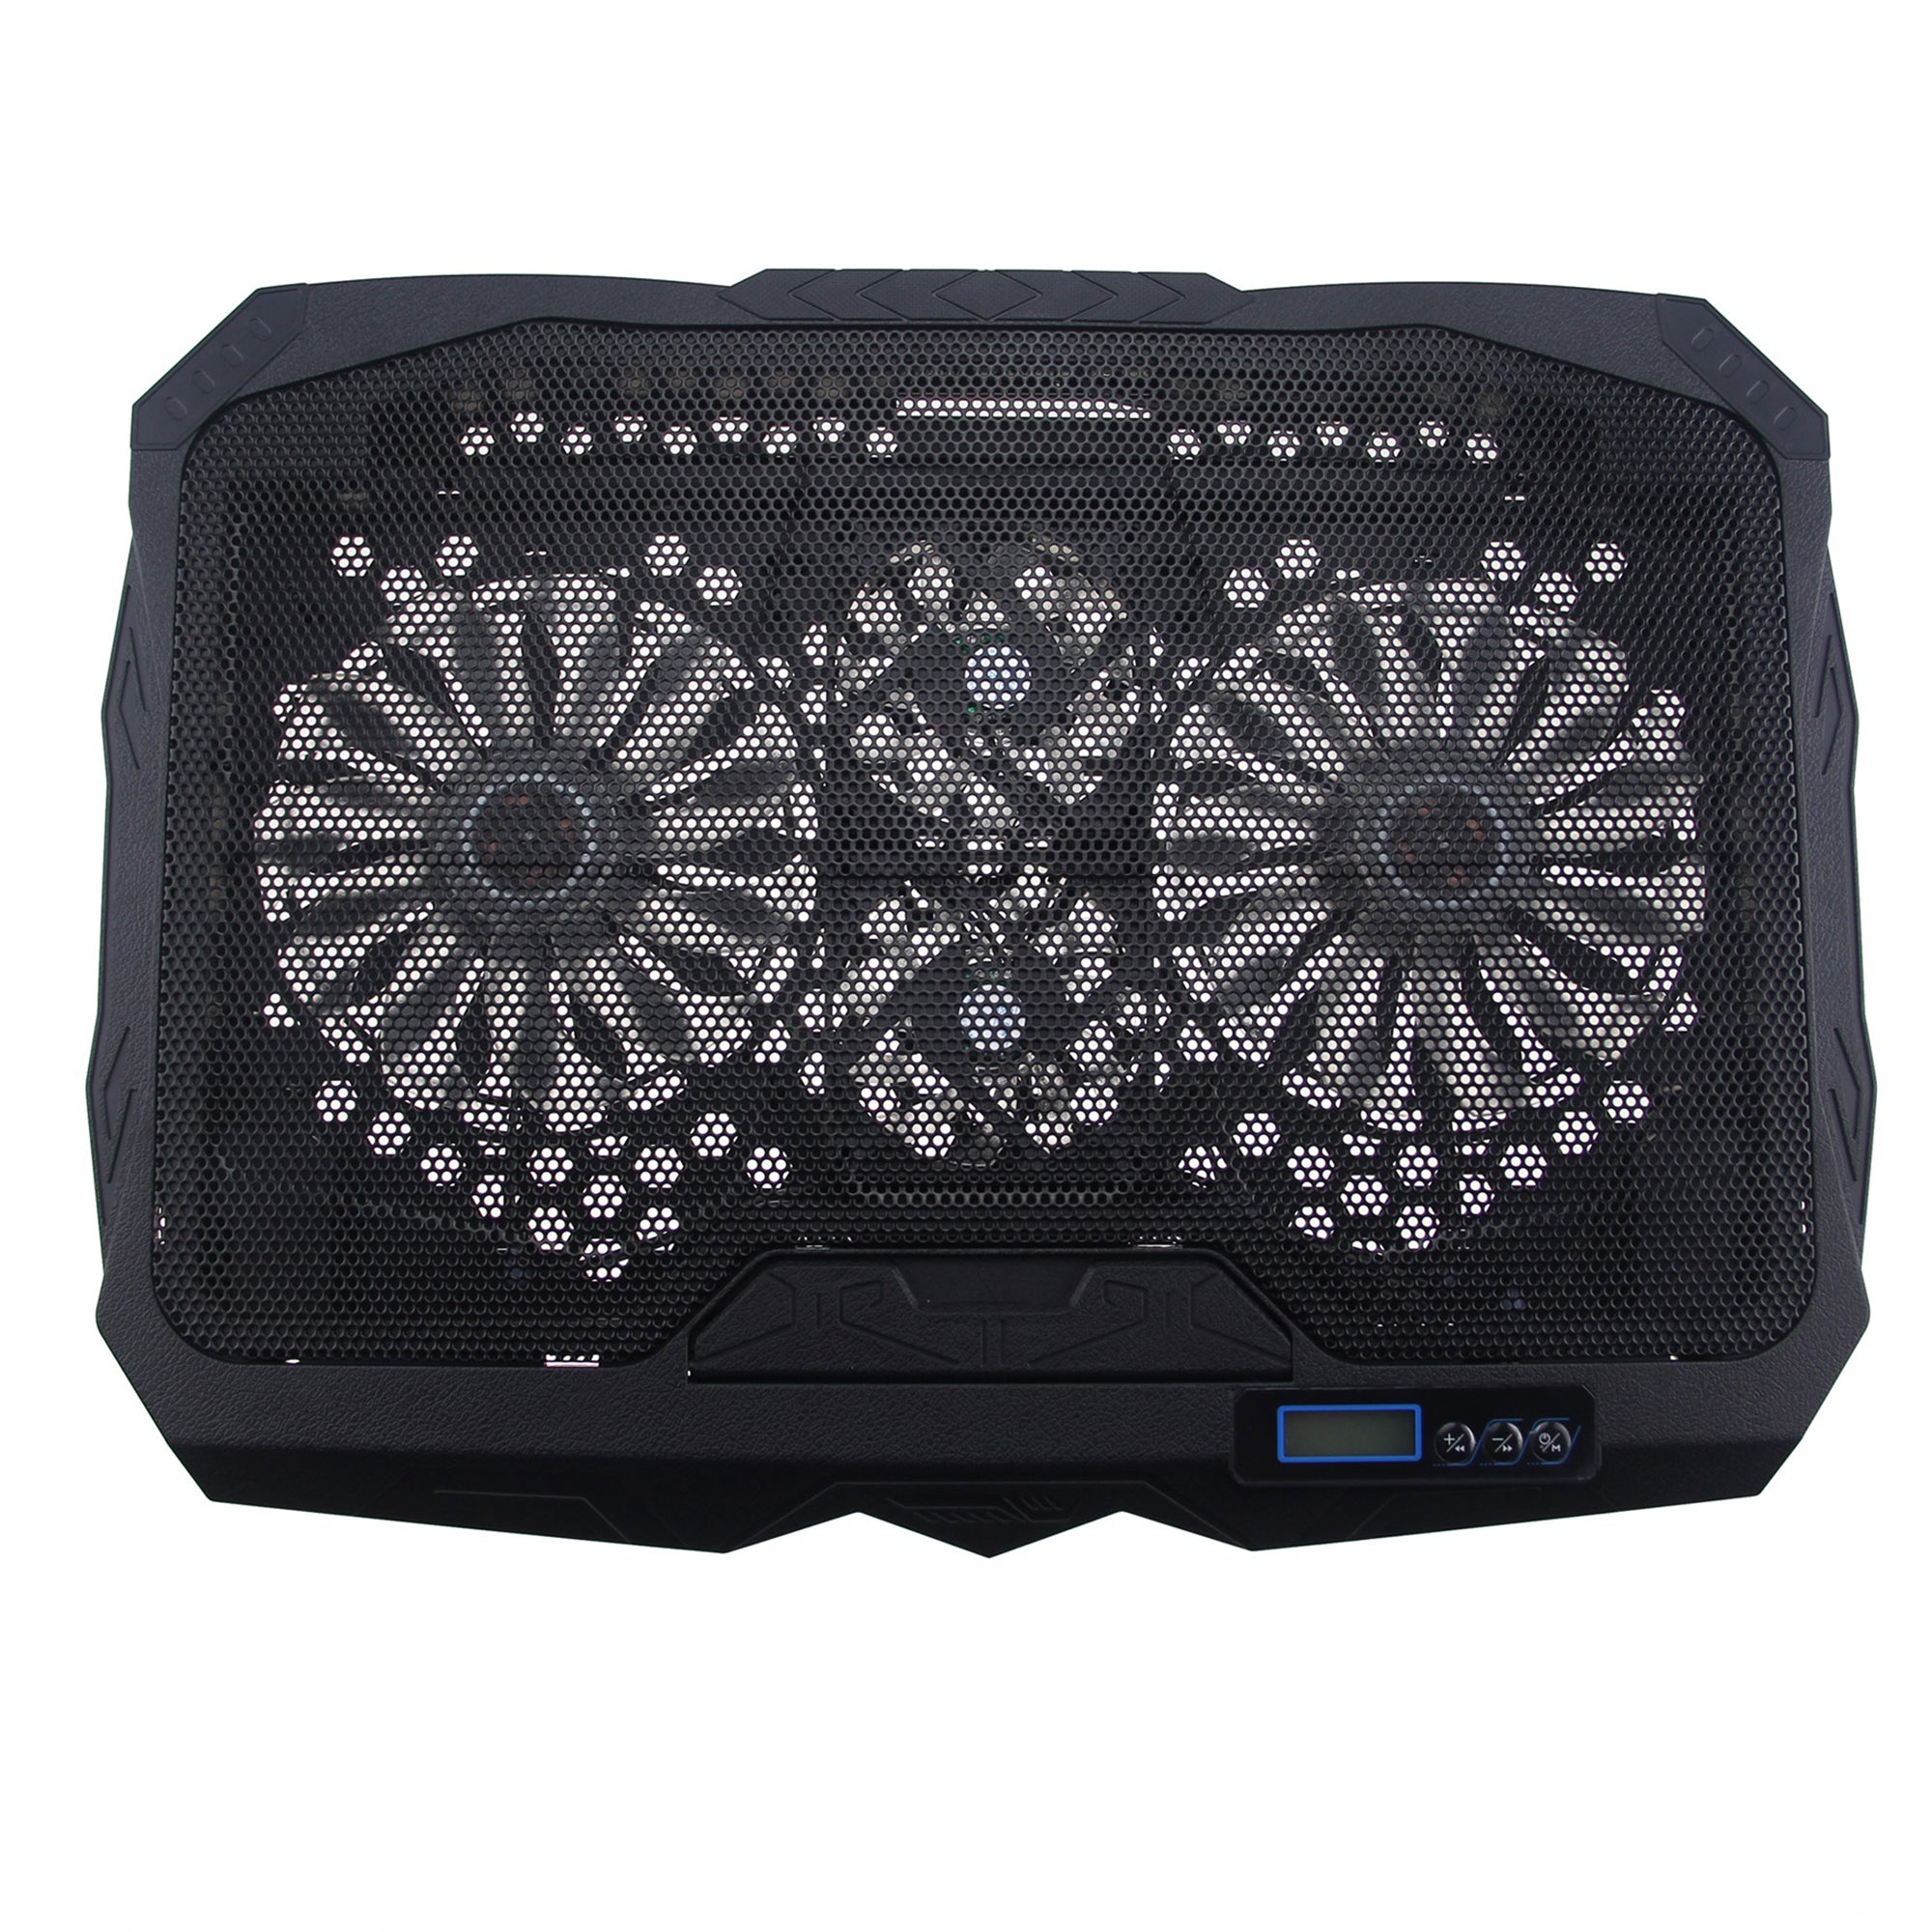 S18 Notebook Router 4-Fan Cooler Radiator Adjustable Wind Speed Laptop Cooling Pad with Display Screen - Green Light